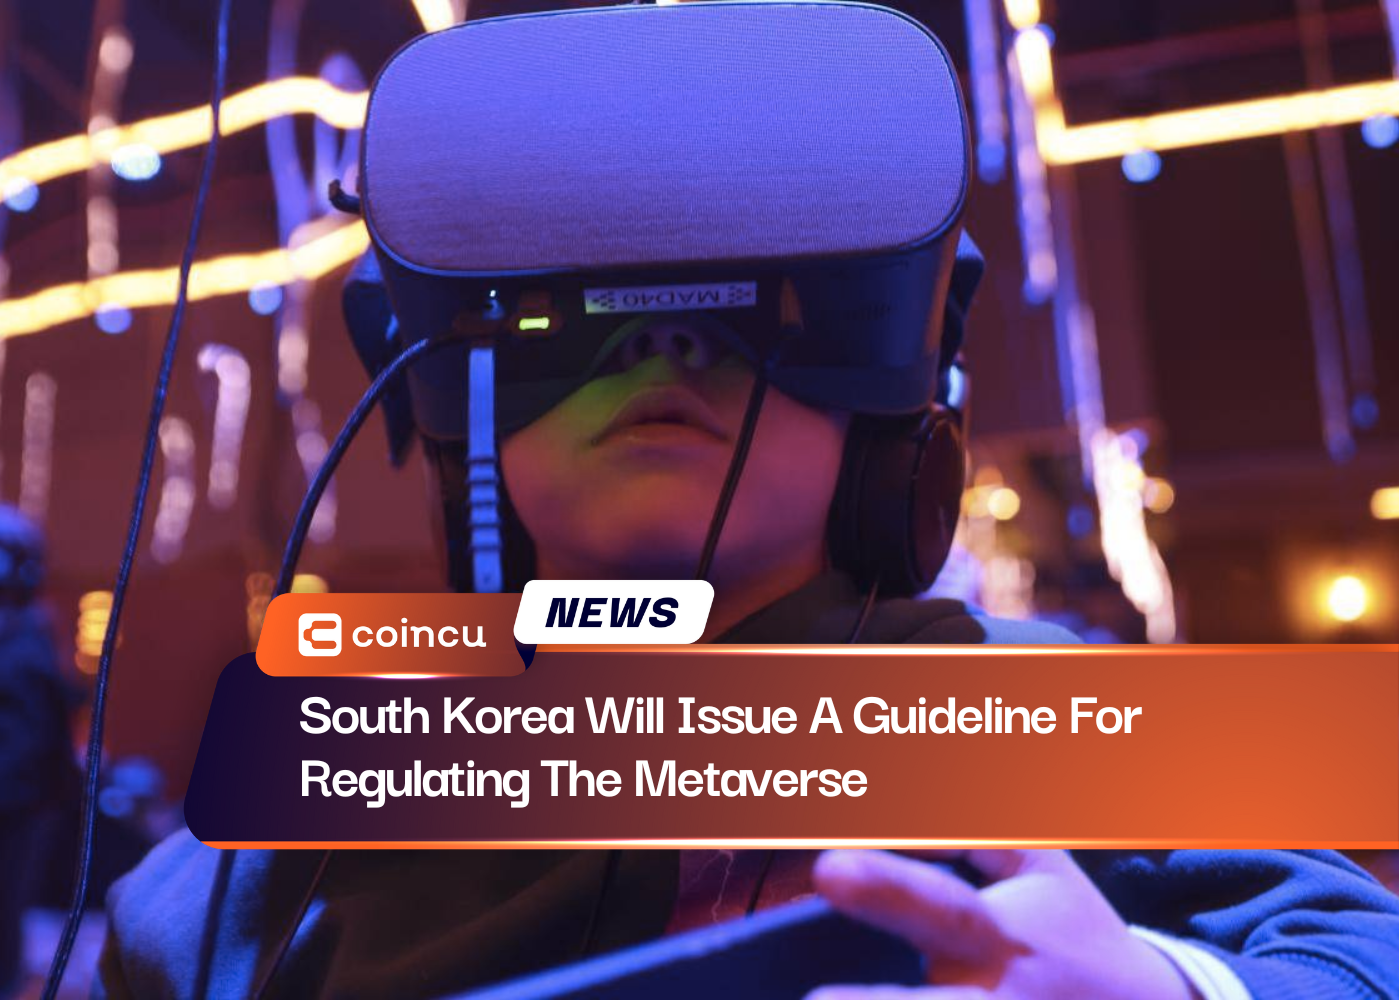 South Korea Will Issue A Guideline For Regulating The Metaverse